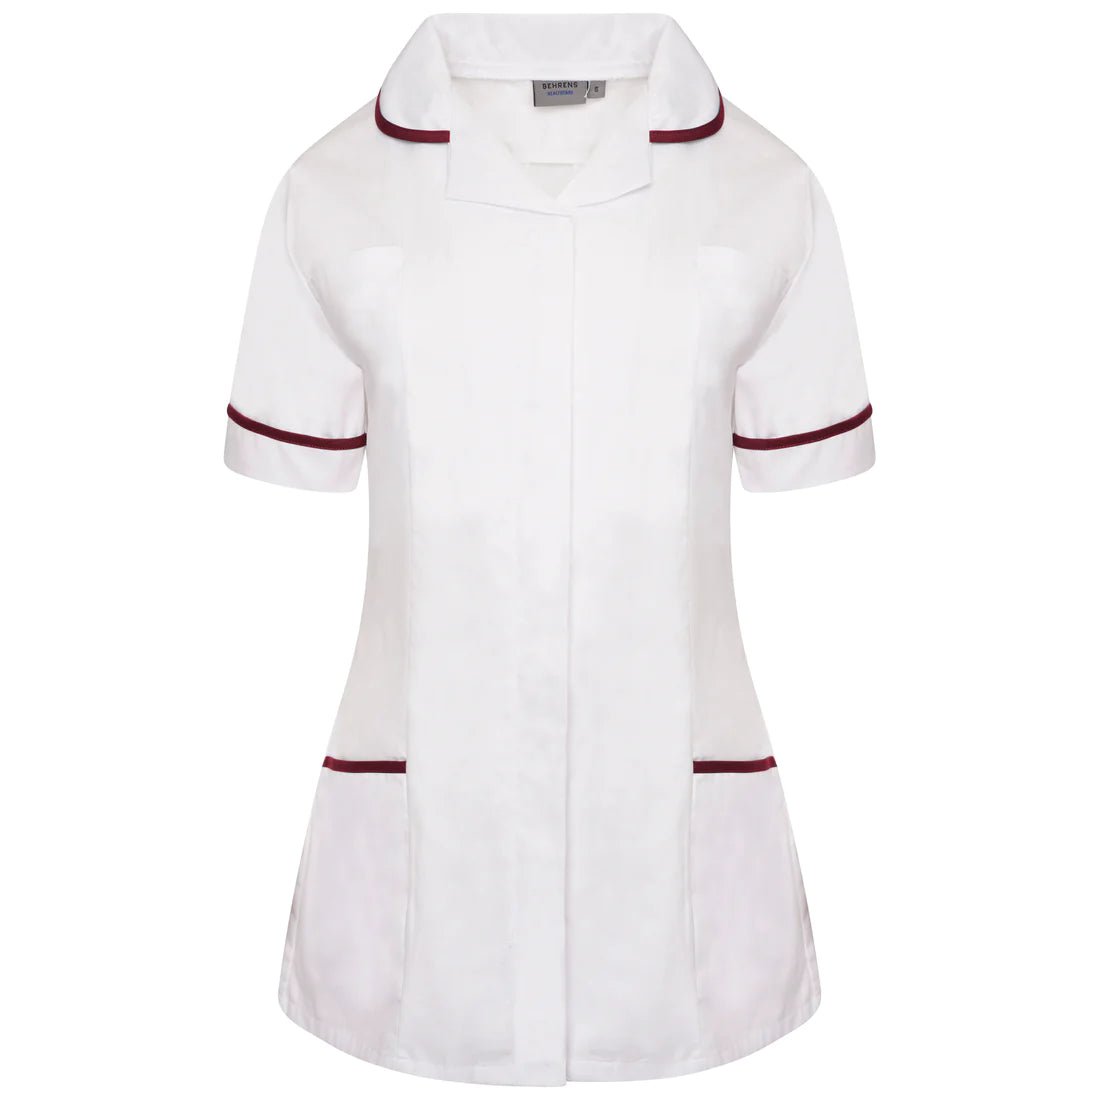 White/Maroon Contrast Ladies Tunic with Round Collar - NCLTPS